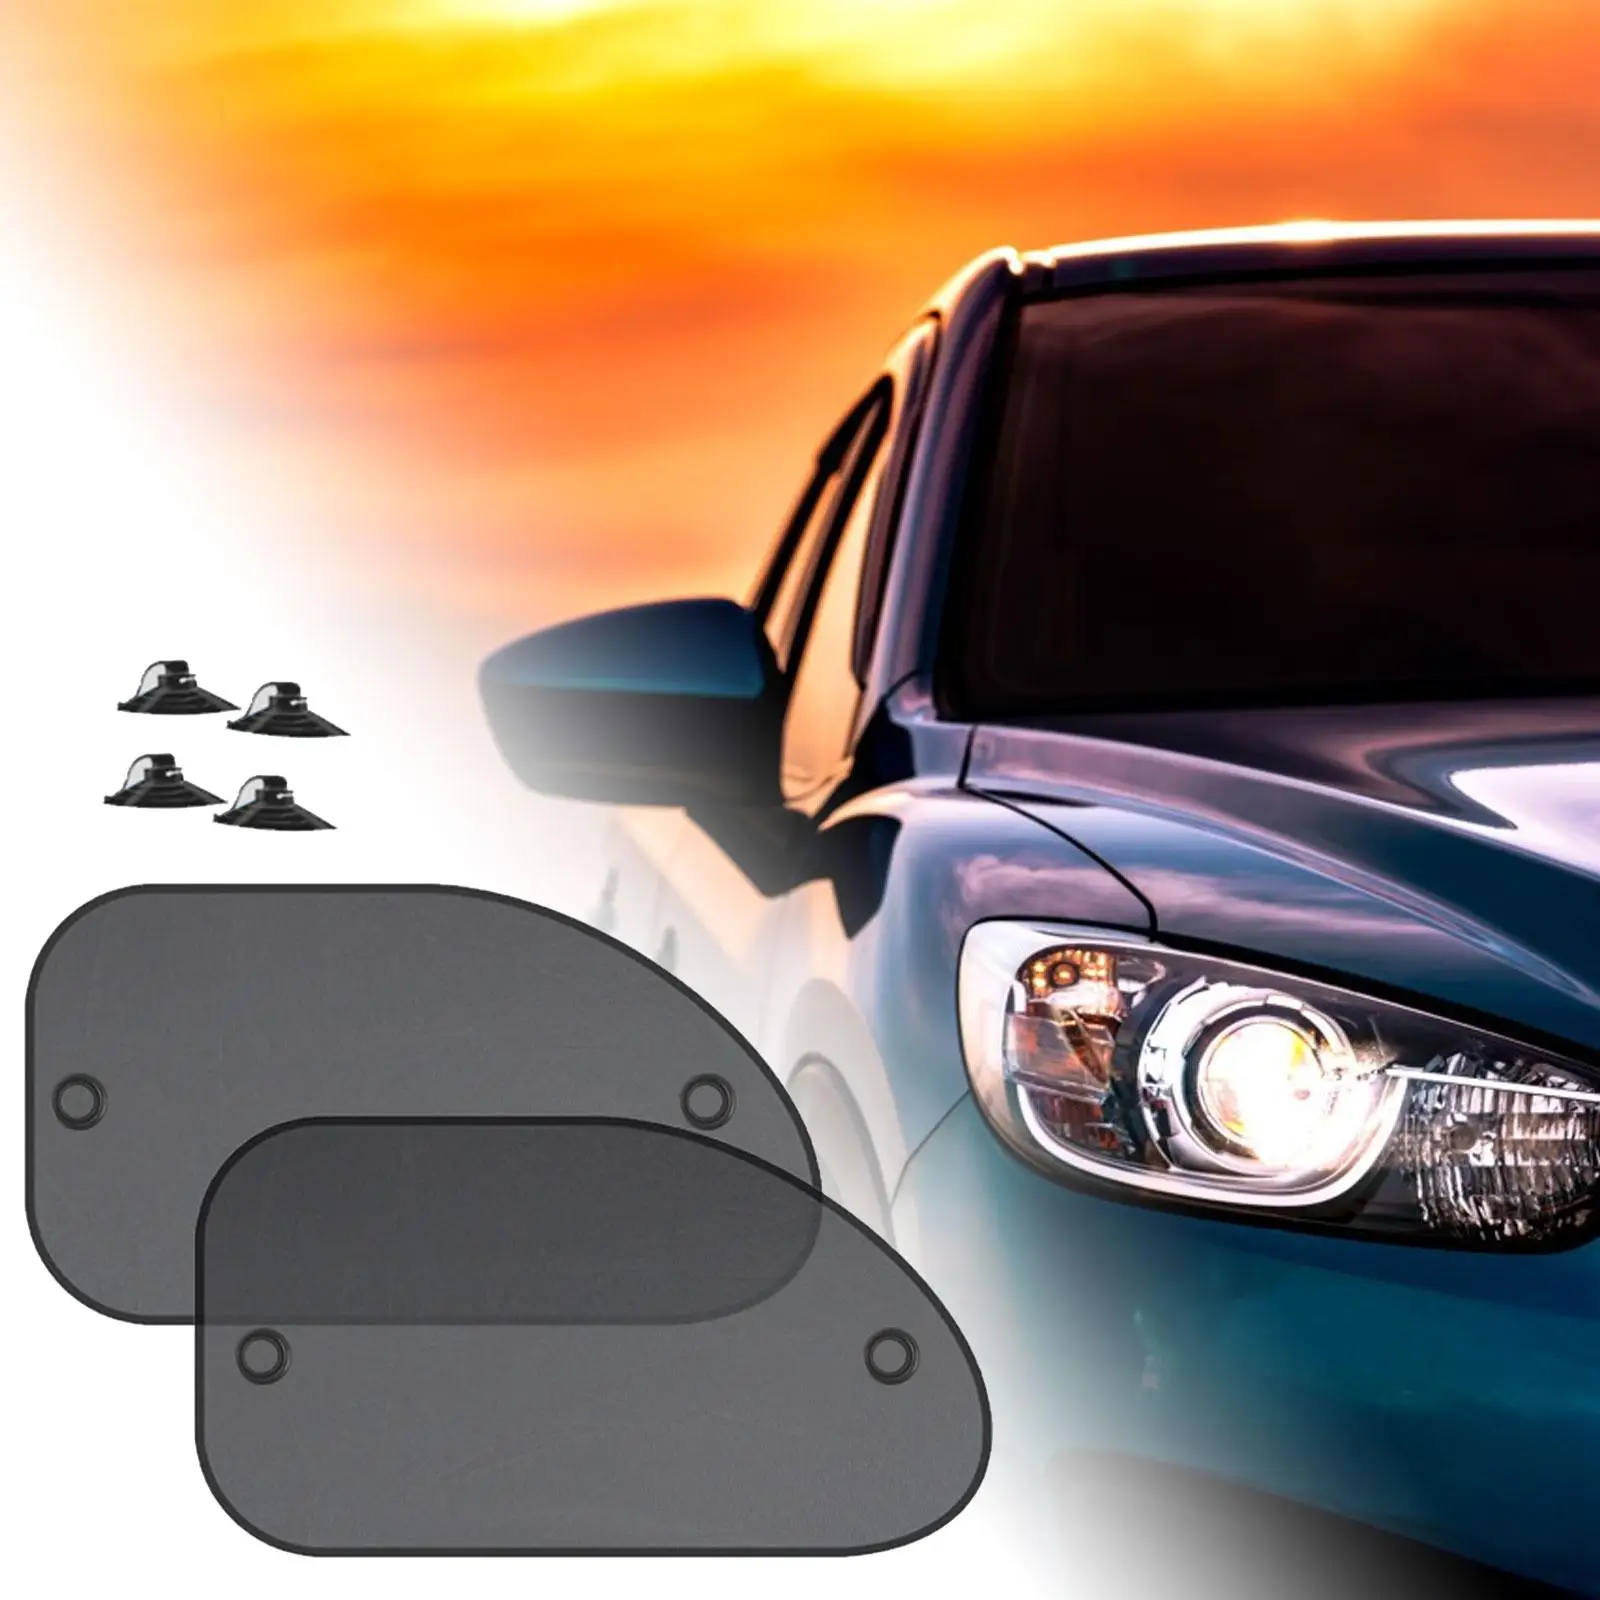 2 Pieces Car Side Window Shades Foldable Sunshade for Taking A Nap Changing Clothes Keep Passengers and Car Interior Cool